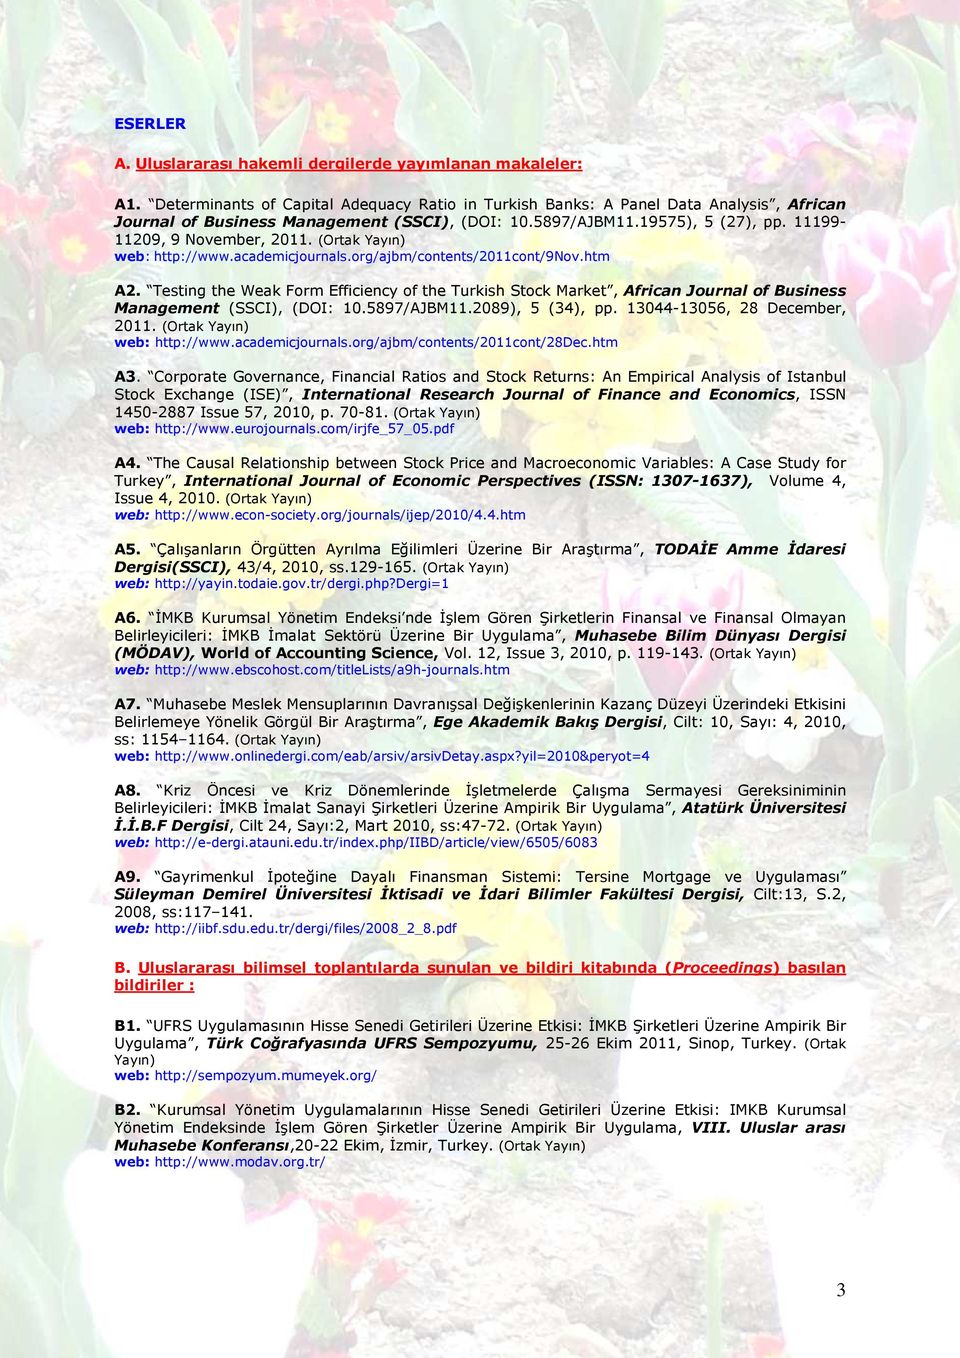 (Ortak Yayın) web: http://www.academicjournals.org/ajbm/contents/2011cont/9nov.htm A2.